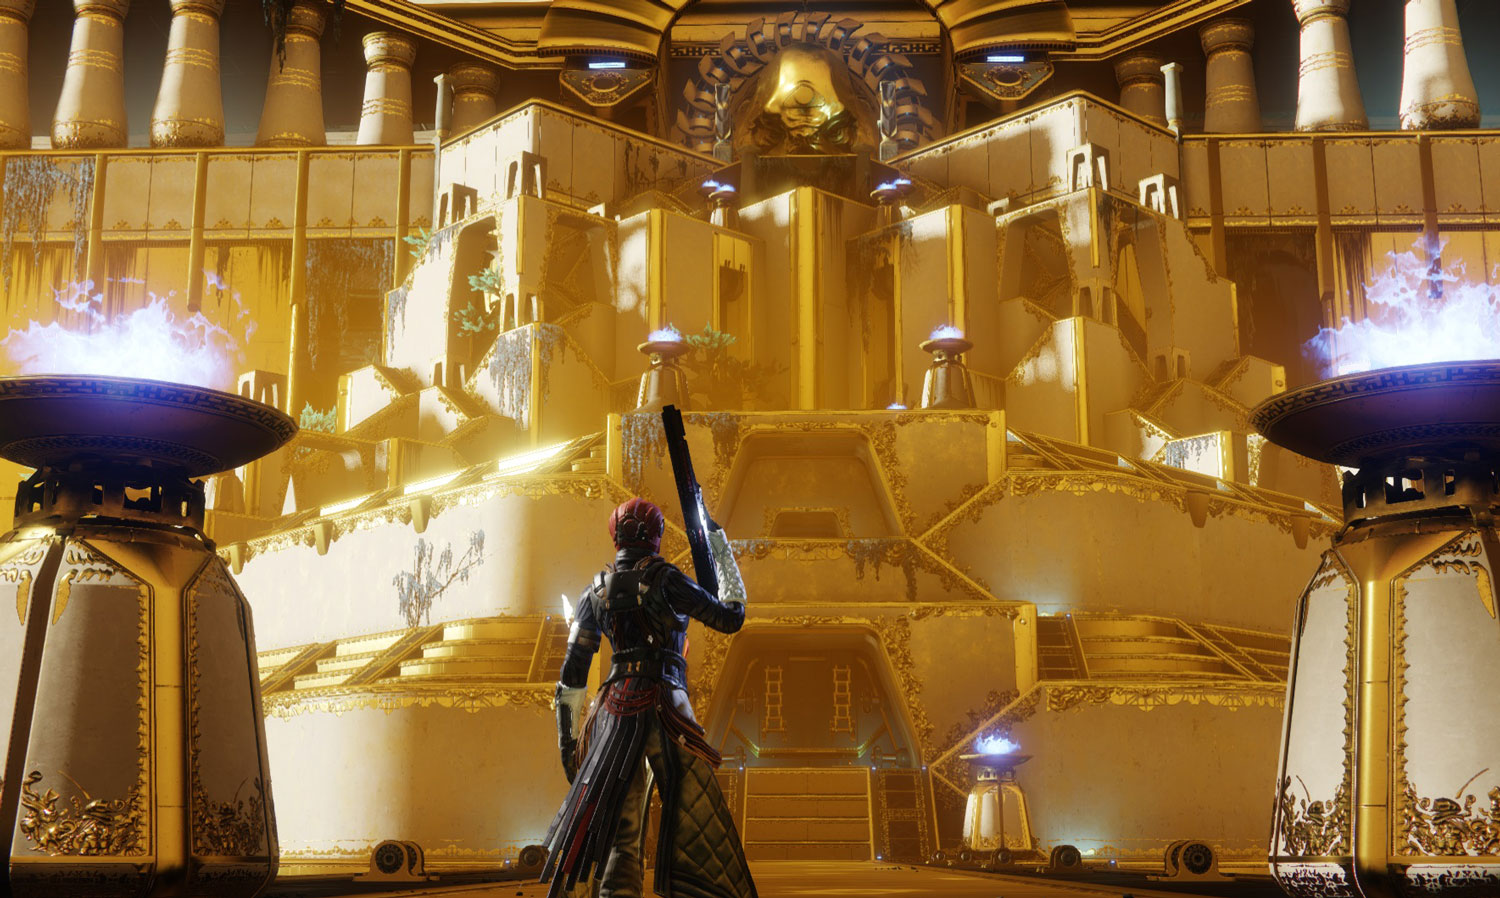 Destiny 2 players emphasize the “tragic” impact of the Content Vault on the new player experience